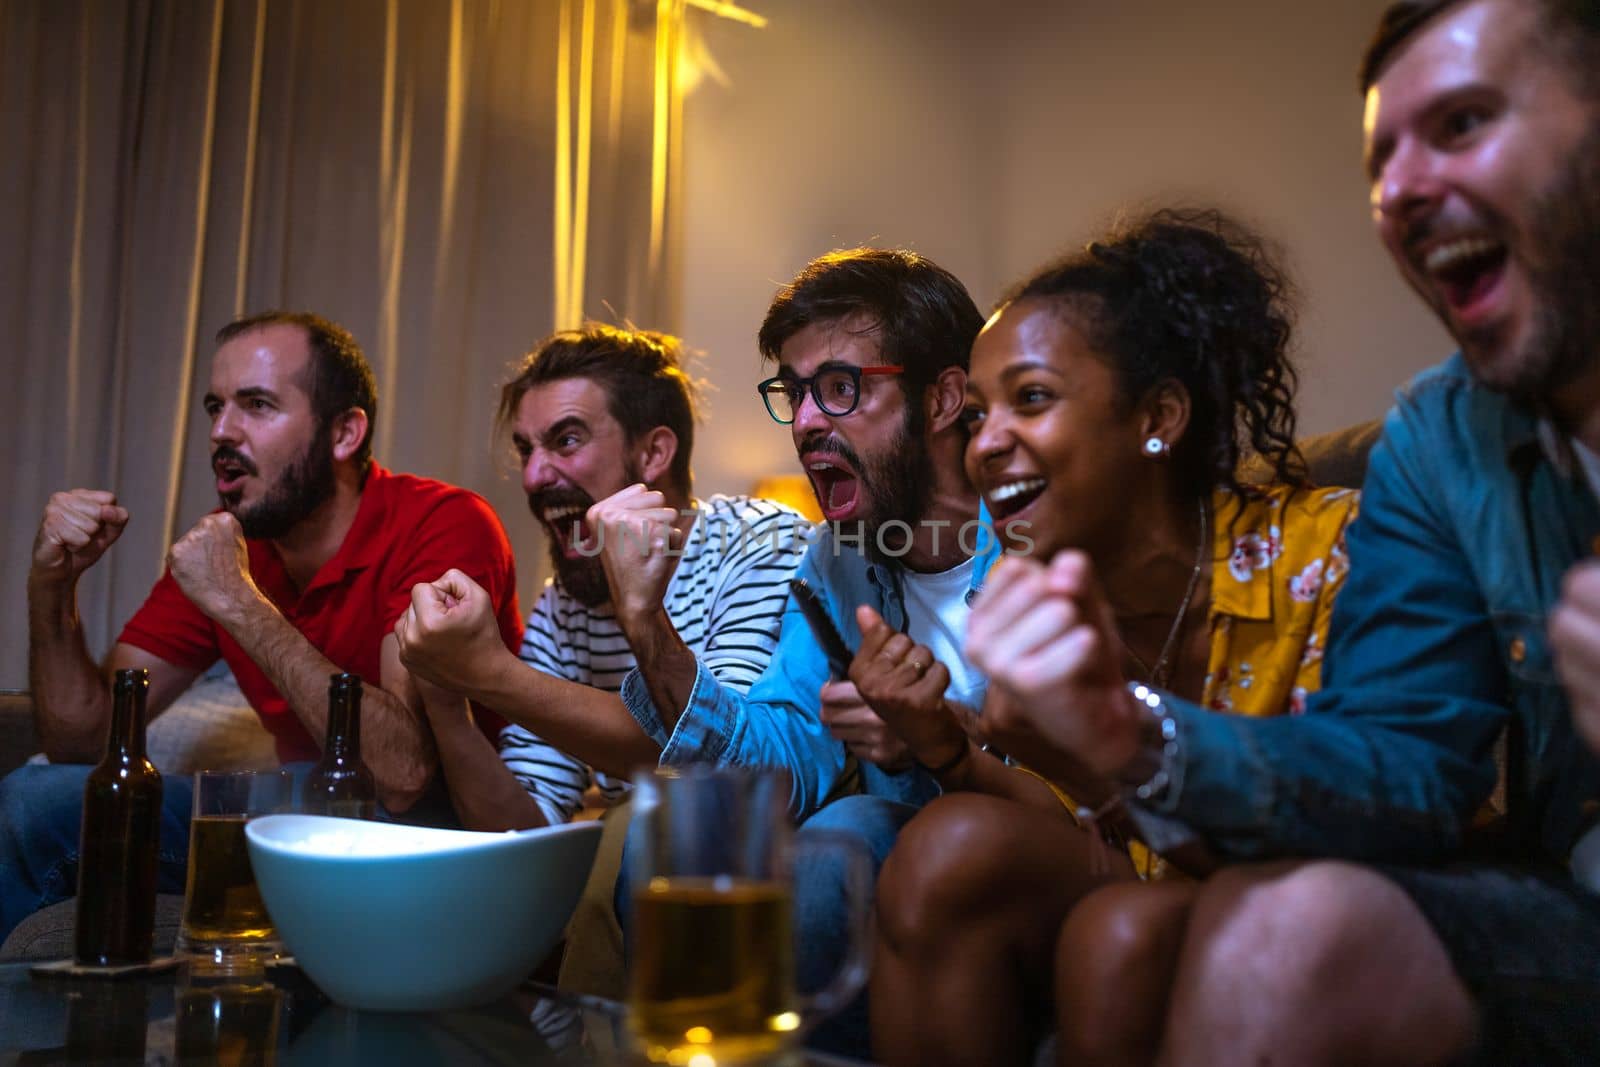 Group of friends watching football game on tv celebrating team victory. Soccer fans celebrating team scoring goal. Leisure activities concept.